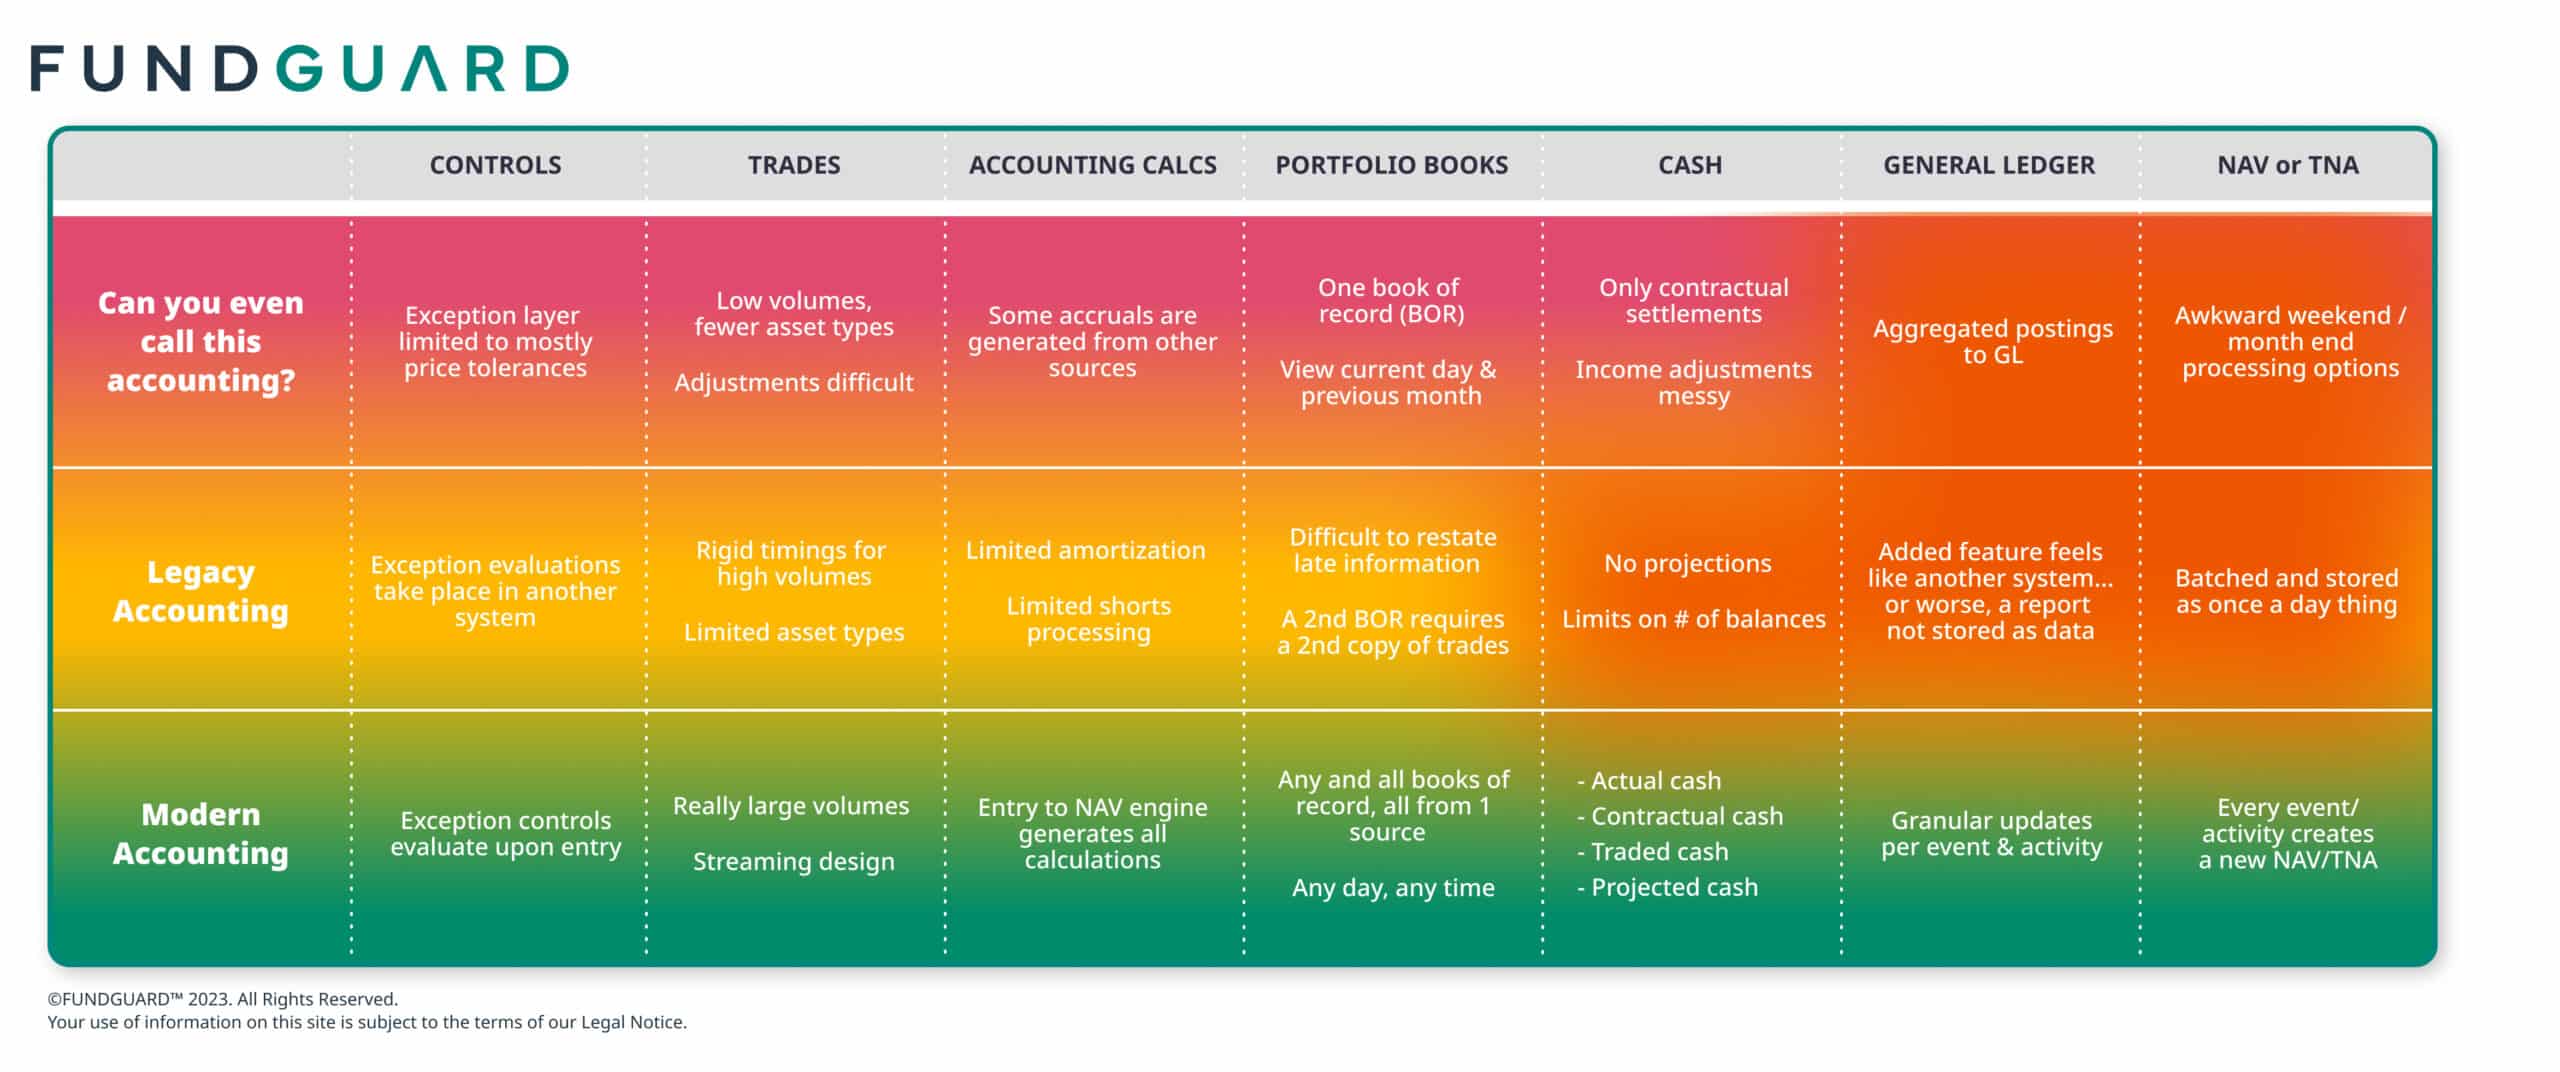 A heatmap in shades of red/amber/green showing distinction of legacy vs modern tech investment accounting